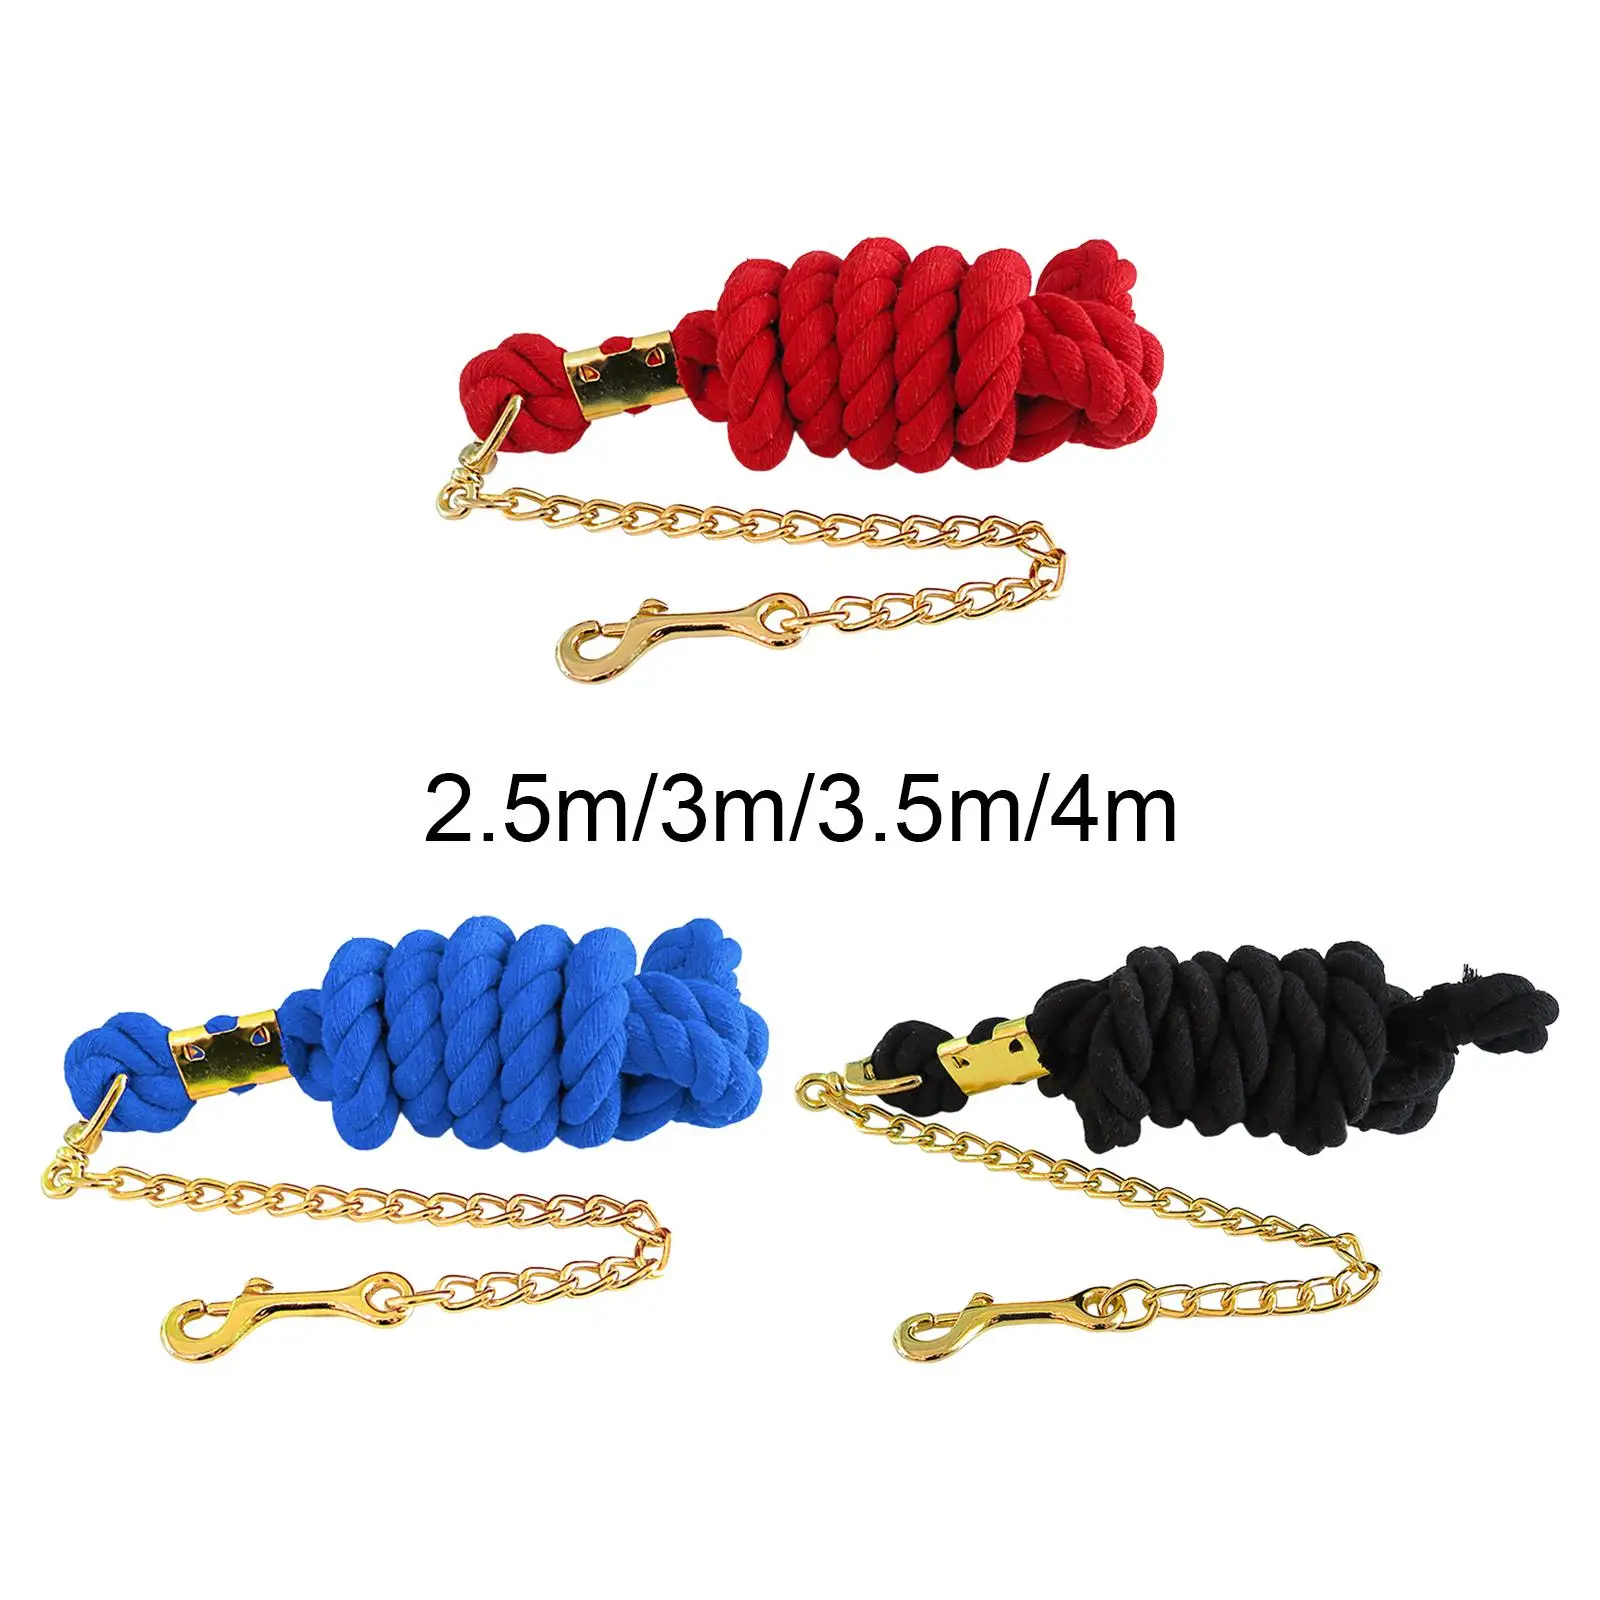 Braided  Horse Leading Rope with Chain Bolt Snap Accessory Practical Swivel Buckle Soft Handmade Easy Use Durable Heavy Duty